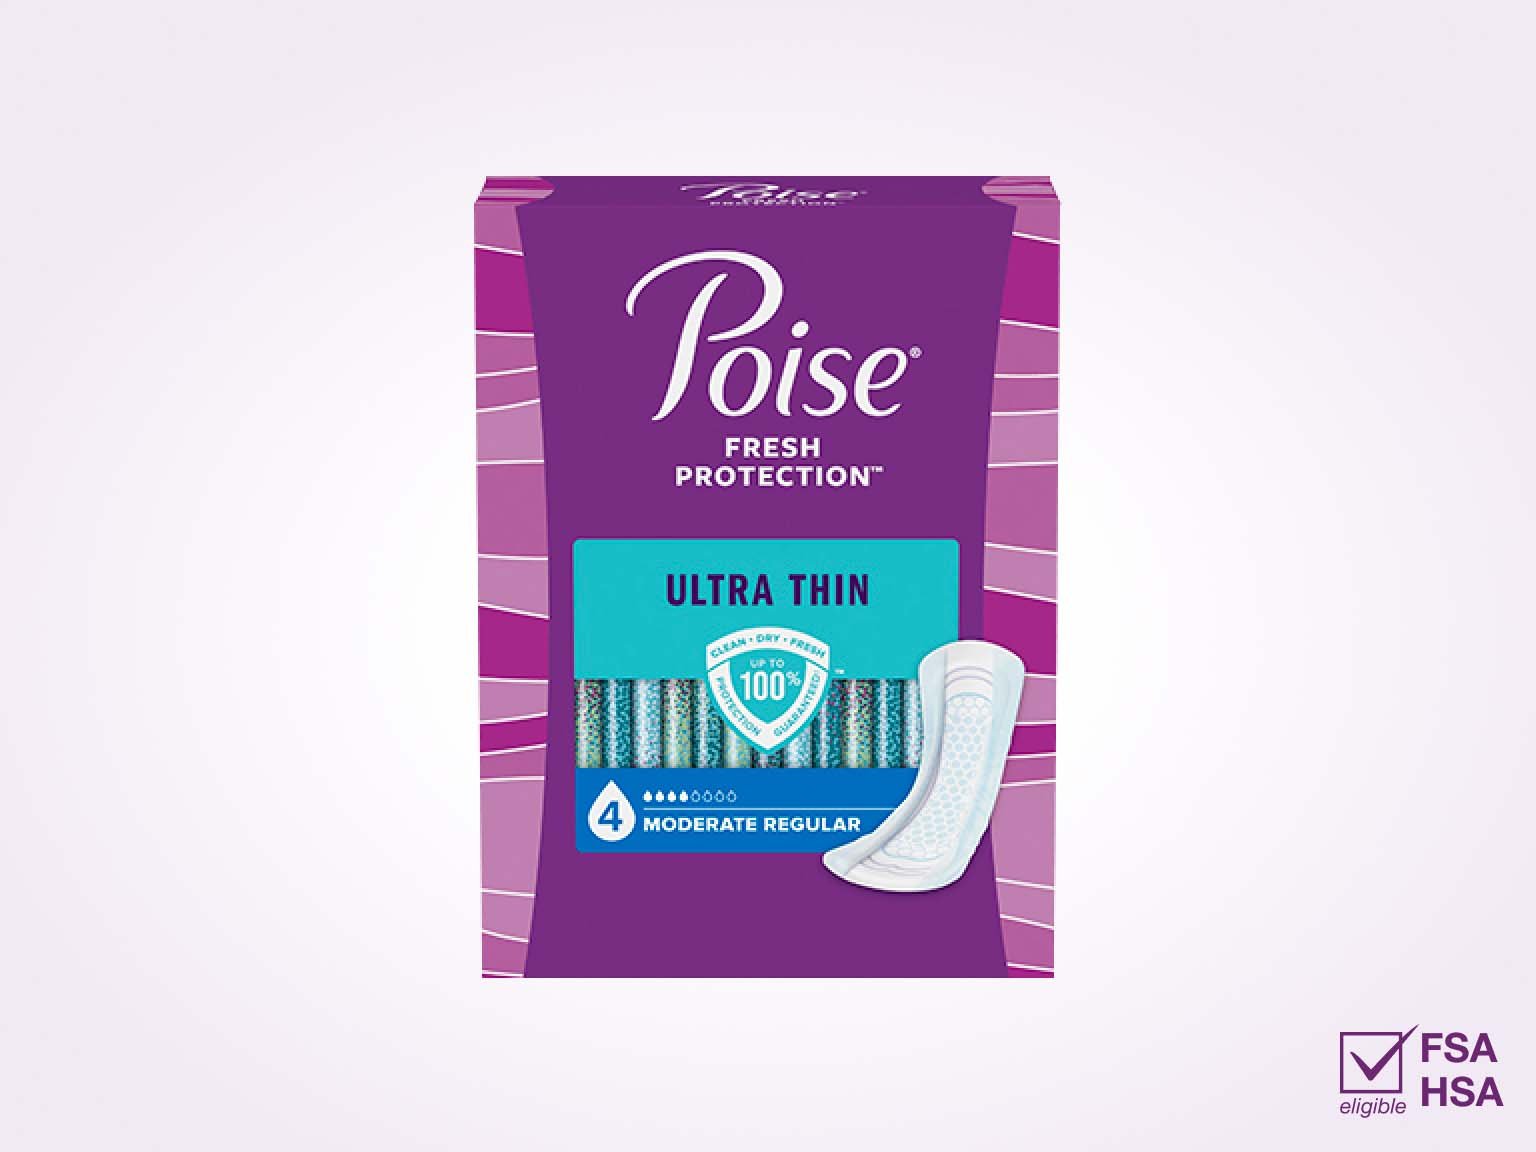 https://www.poise.com/-/media/feature/poise/na/us/product/plp/product/desktop/ultra-thin---no-wing-4-drop-moderate-regular-length.jpg?rev=a8adc58e658d4c38a34bc532371b0585